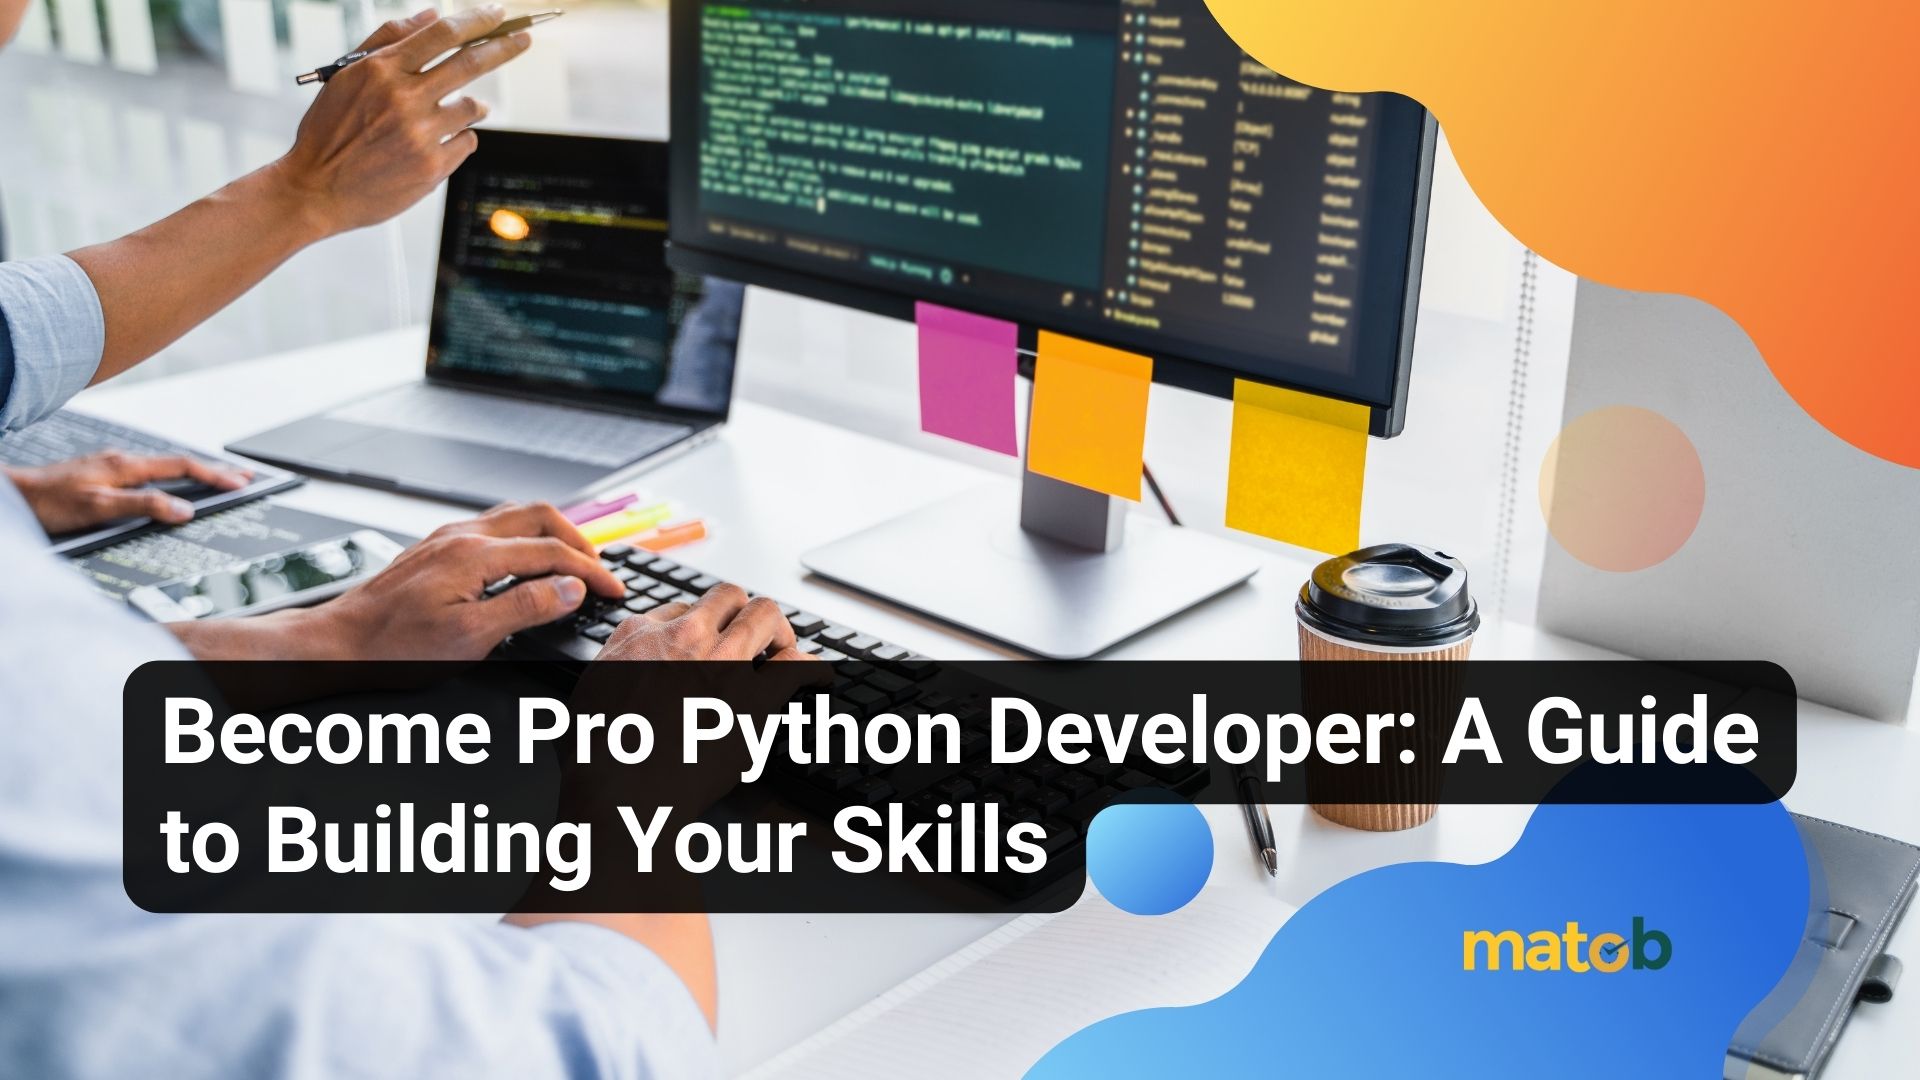 Become Pro Python Developer: A Guide to Building Your Skills